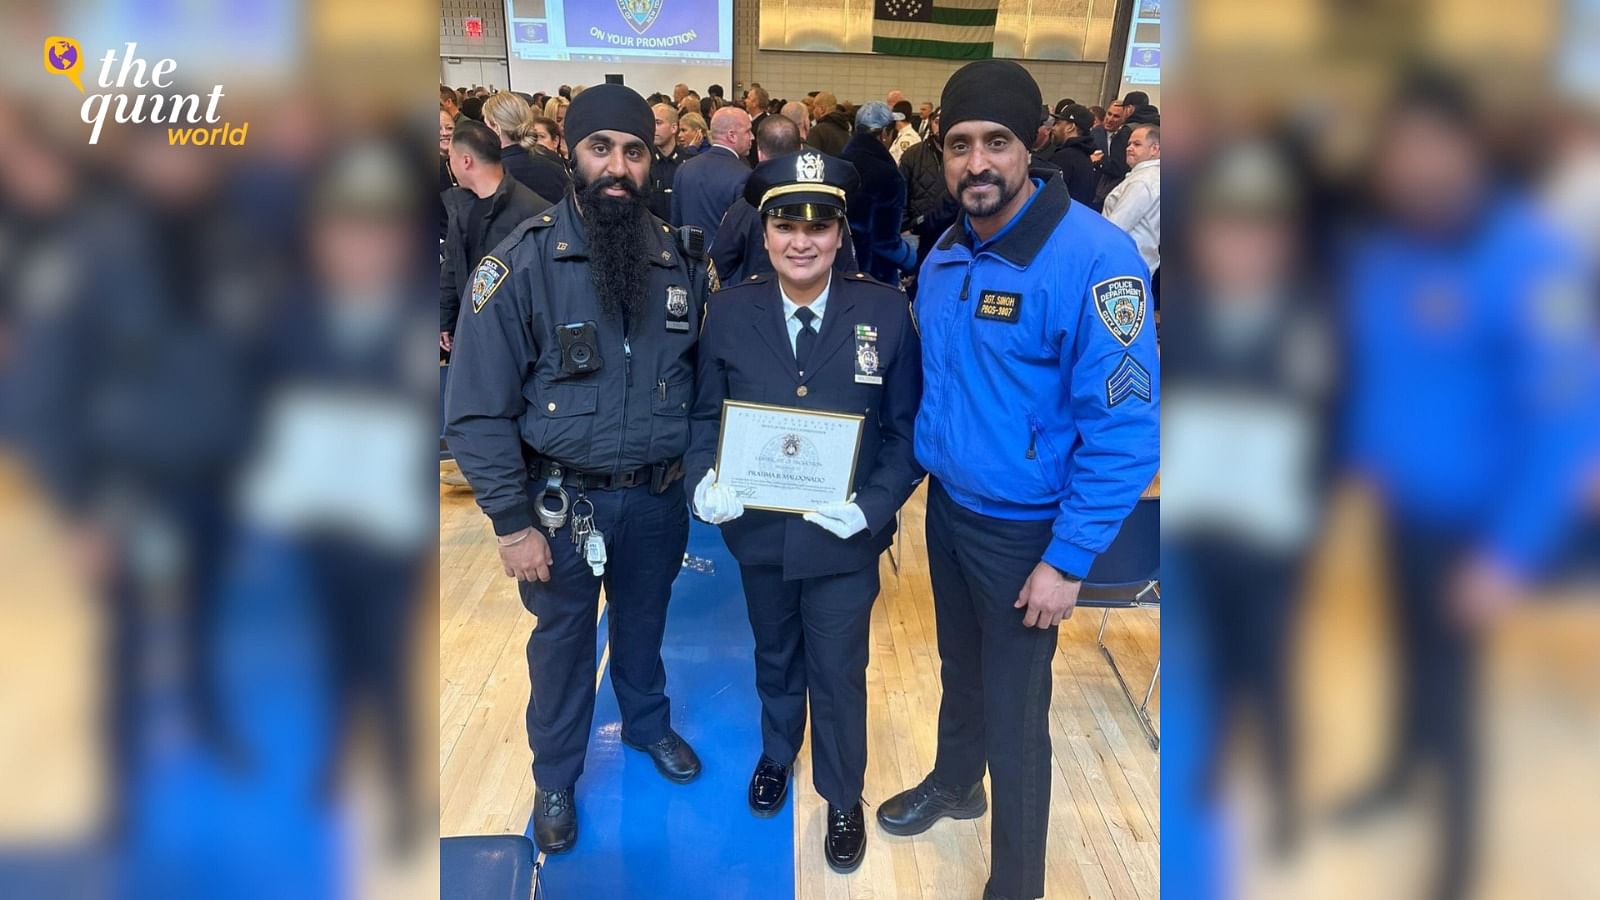 <div class="paragraphs"><p>Captain Pratima Bhullar Maldonado created history by becoming a captain in the police force after her promotion last month, CBS News reported on Monday.</p></div>